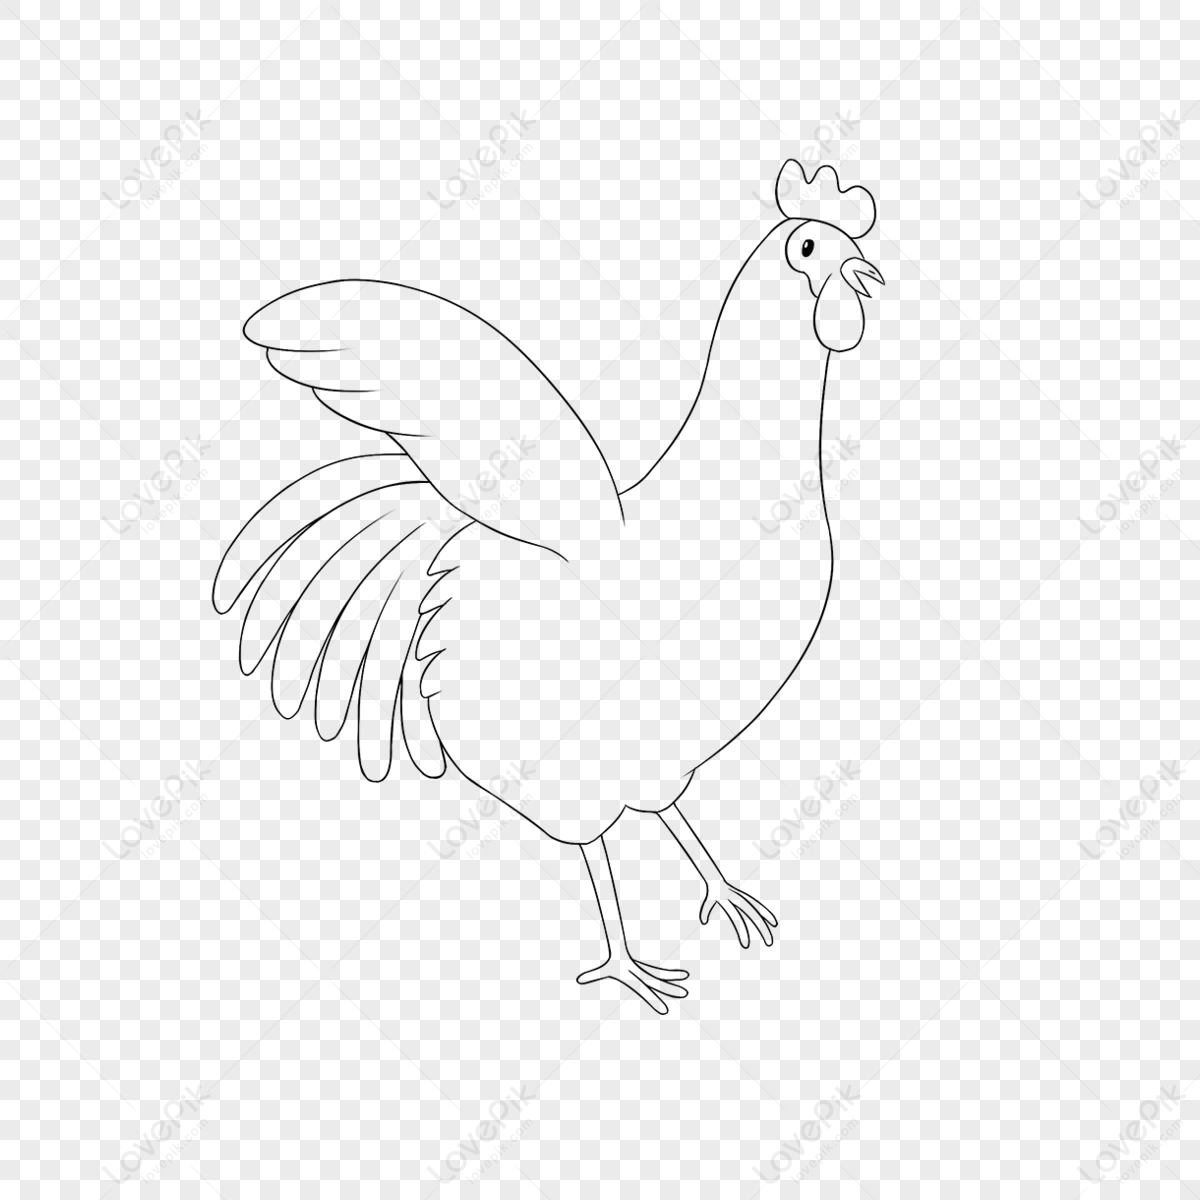 Kawaii Anime Rooster Big Sparkle Eyes Stock Vector (Royalty Free) 488942725  | Shutterstock